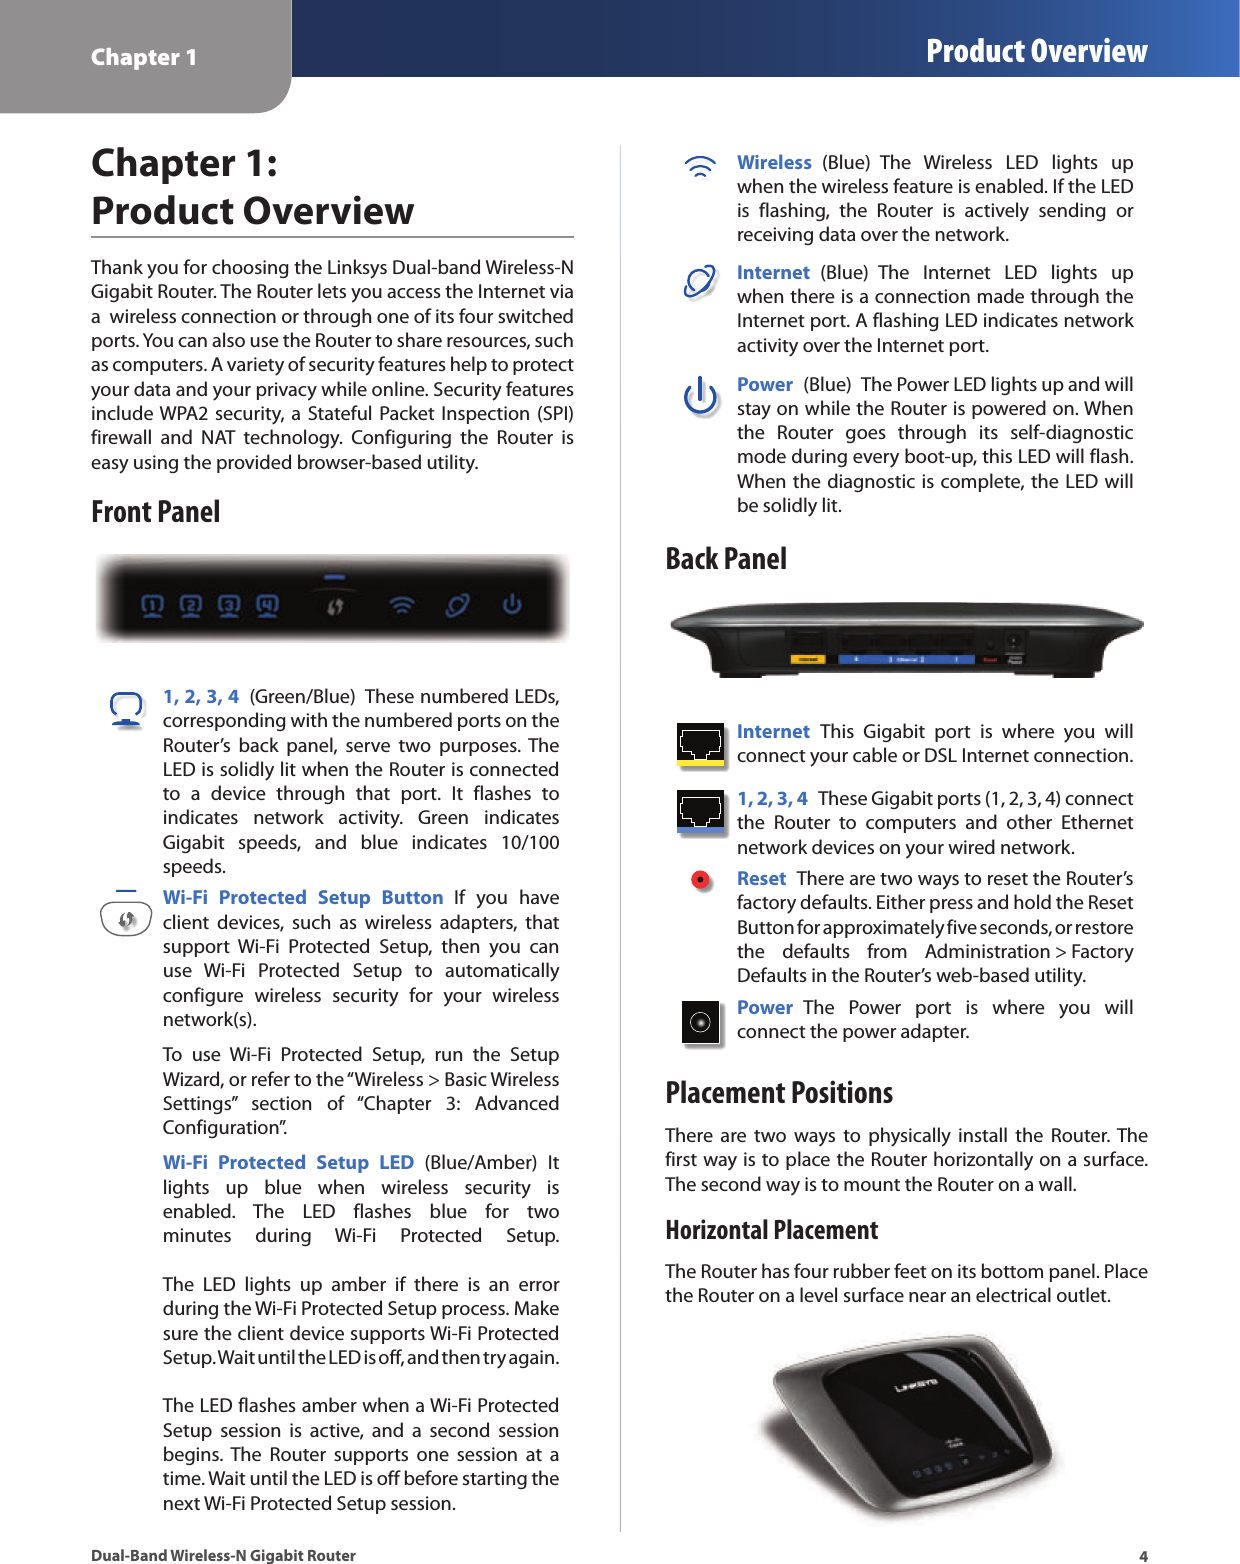 Chapter 1 Product Overview4Dual-Band Wireless-N Gigabit RouterChapter 1: Product OverviewThank you for choosing the Linksys Dual-band Wireless-N Gigabit Router. The Router lets you access the Internet via a  wireless connection or through one of its four switched ports. You can also use the Router to share resources, such as computers. A variety of security features help to protect your data and your privacy while online. Security features include WPA2 security, a Stateful Packet Inspection (SPI) firewall  and  NAT  technology.  Configuring  the  Router  is easy using the provided browser-based utility.Front Panel1, 2, 3, 4  (Green/Blue)  These numbered LEDs, corresponding with the numbered ports on the Router’s  back  panel,  serve  two  purposes. The LED is solidly lit when the Router is connected to  a  device  through  that  port.  It  flashes  to indicates  network  activity.  Green  indicates Gigabit  speeds,  and  blue  indicates  10/100 speeds.Wi-Fi  Protected  Setup  Button  If  you  have client  devices,  such  as  wireless  adapters,  that support  Wi-Fi  Protected  Setup,  then  you  can use  Wi-Fi  Protected  Setup  to  automatically configure  wireless  security  for  your  wireless network(s).To  use  Wi-Fi  Protected  Setup,  run  the  Setup Wizard, or refer to the “Wireless &gt; Basic Wireless Settings”  section  of  “Chapter  3:  Advanced Configuration”.Wi-Fi  Protected  Setup  LED  (Blue/Amber)  It lights  up  blue  when  wireless  security  is enabled.  The  LED  flashes  blue  for  two minutes  during  Wi-Fi  Protected  Setup.    The  LED  lights  up  amber  if  there  is  an  error during the Wi-Fi Protected Setup process. Make sure the client device supports Wi-Fi Protected Setup. Wait until the LED is off, and then try again.   The LED flashes amber when a Wi-Fi Protected Setup  session  is  active,  and  a  second  session begins. The  Router  supports  one  session  at  a time. Wait until the LED is off before starting the next Wi-Fi Protected Setup session.Wireless  (Blue)  The  Wireless  LED  lights  up when the wireless feature is enabled. If the LED is  flashing,  the  Router  is  actively  sending  or receiving data over the network.Internet  (Blue)  The  Internet  LED  lights  up when there is a connection made through the Internet port. A flashing LED indicates network activity over the Internet port.Power  (Blue)  The Power LED lights up and will stay on while the Router is powered on. When the  Router  goes  through  its  self-diagnostic mode during every boot-up, this LED will flash. When the diagnostic is complete, the LED will be solidly lit.Back PanelInternet  This  Gigabit  port  is  where  you  will connect your cable or DSL Internet connection. 1, 2, 3, 4  These Gigabit ports (1, 2, 3, 4) connect the  Router  to  computers  and  other  Ethernet network devices on your wired network. Reset  There are two ways to reset the Router’s factory defaults. Either press and hold the Reset Button for approximately five seconds, or restore the  defaults  from  Administration &gt; Factory Defaults in the Router’s web-based utility. Power  The  Power  port  is  where  you  will  connect the power adapter.Placement PositionsThere are  two  ways  to  physically  install  the Router. The first way is to place the Router horizontally on a surface. The second way is to mount the Router on a wall.Horizontal PlacementThe Router has four rubber feet on its bottom panel. Place the Router on a level surface near an electrical outlet.